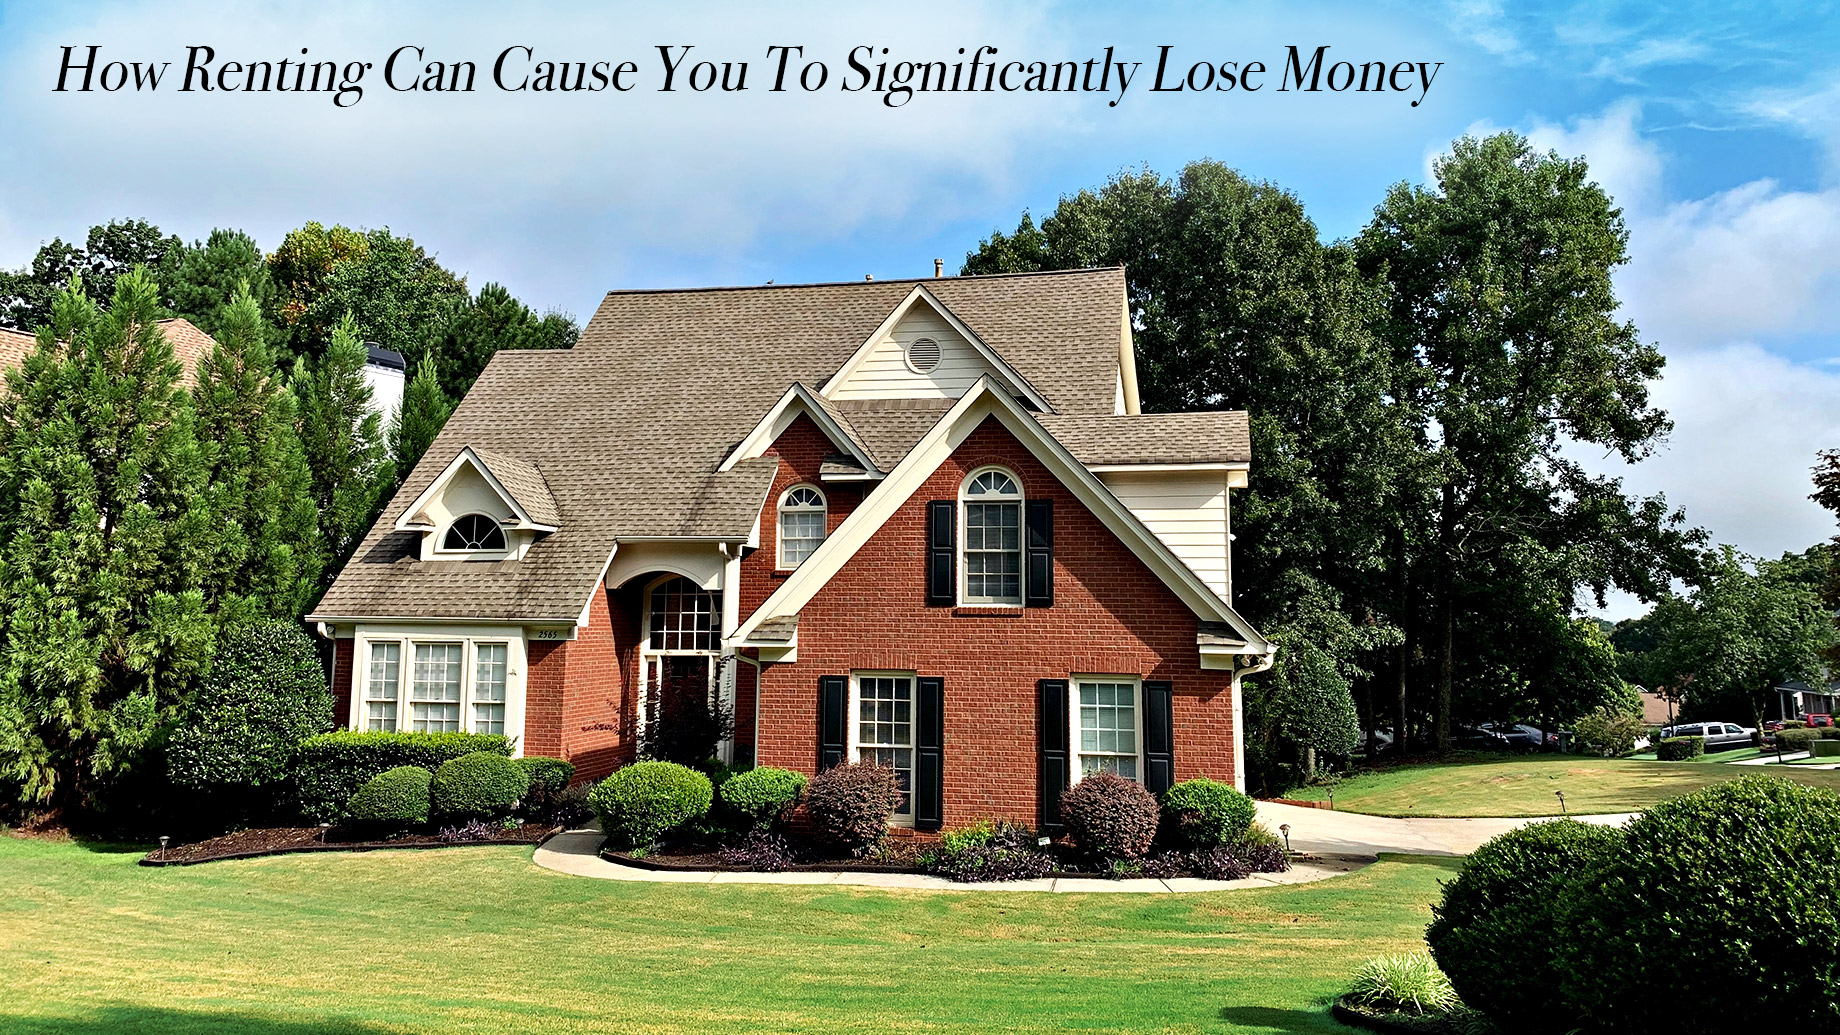 How Renting Can Cause You To Significantly Lose Money